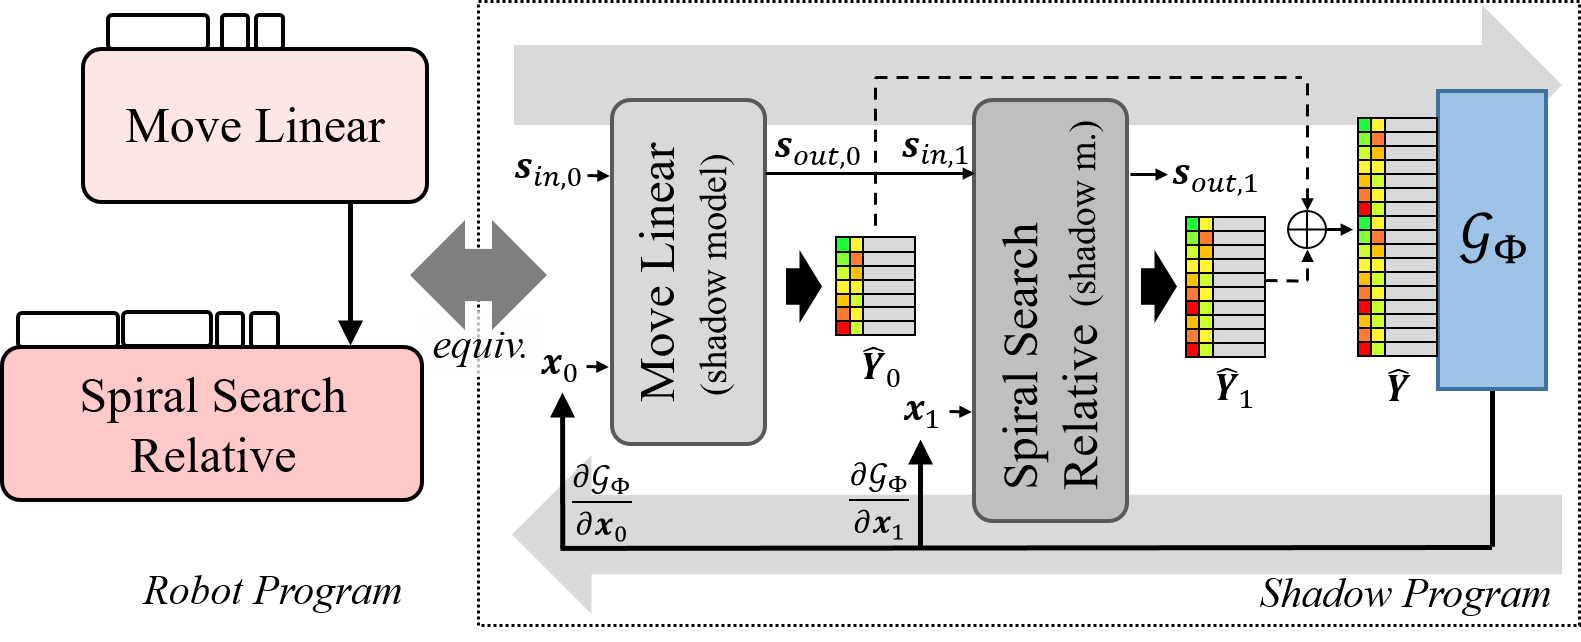 A Shadow Program composed of two Shadow Skills. Just as Shadow Skills are models for individual robot skills, Shadow Programs model complex robot programs (left to right) and allow for the joint optimization of program parameters via gradient descent (right to left).